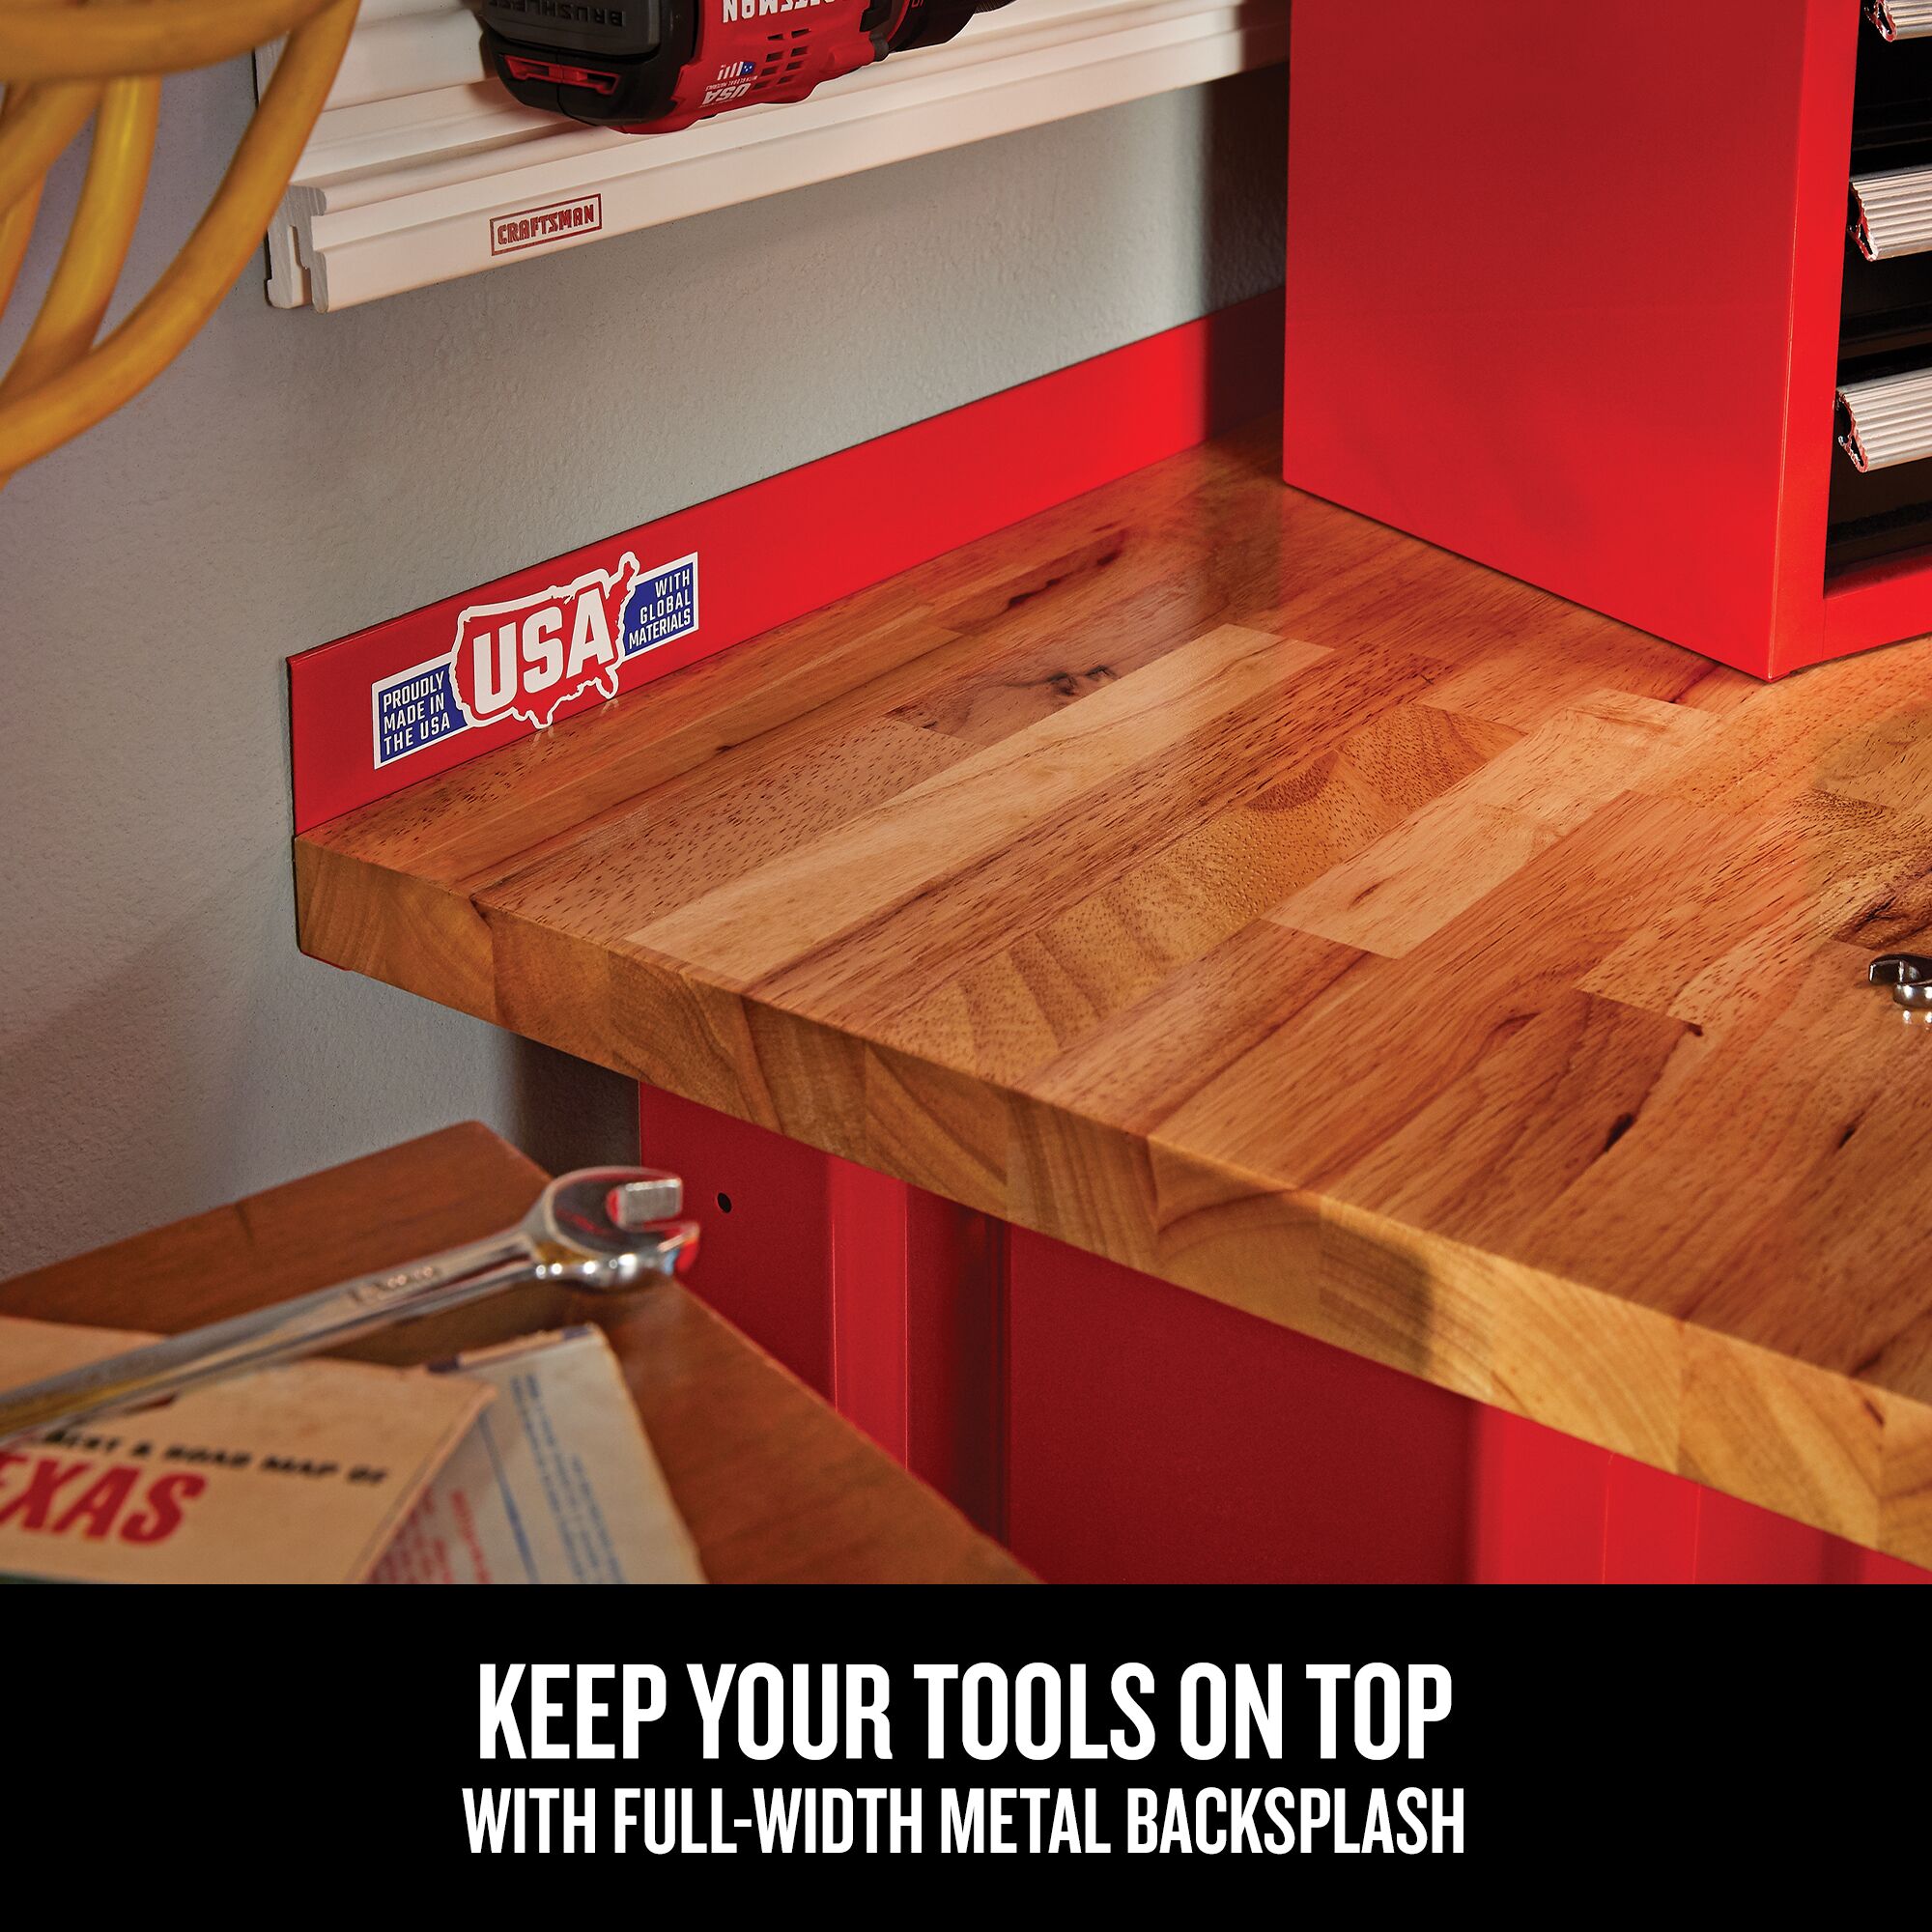 Graphic of CRAFTSMAN Bench & Stationary: Workbench highlighting product features